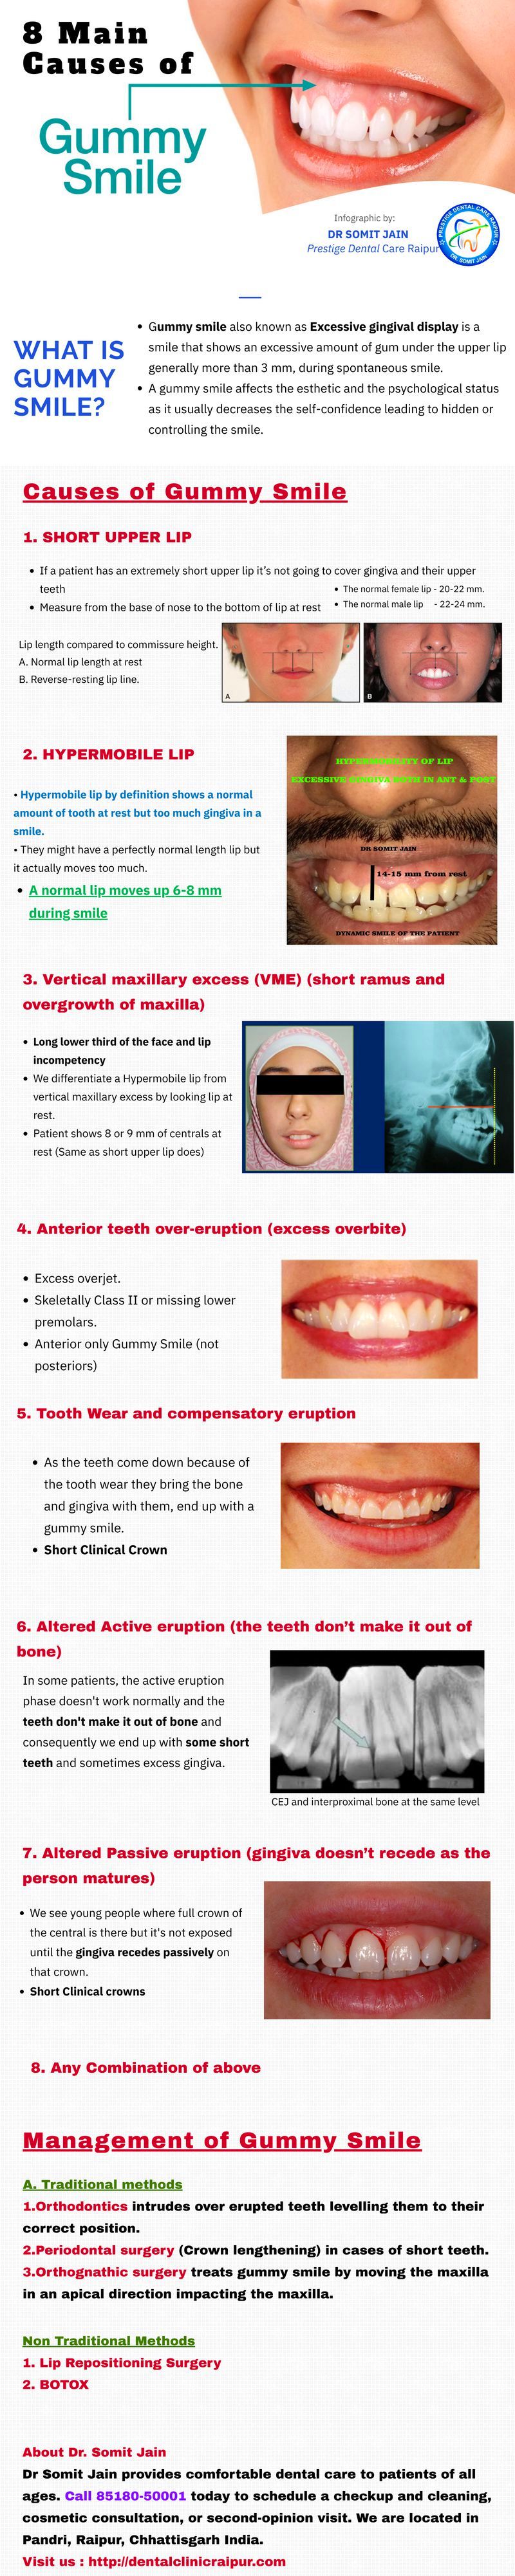 DENTAL INFOGRAPHICS SHOWING MAIN CAUSES OF GUMMY SMILE OR EXCESSIVE GINGIVAL DISPLAY